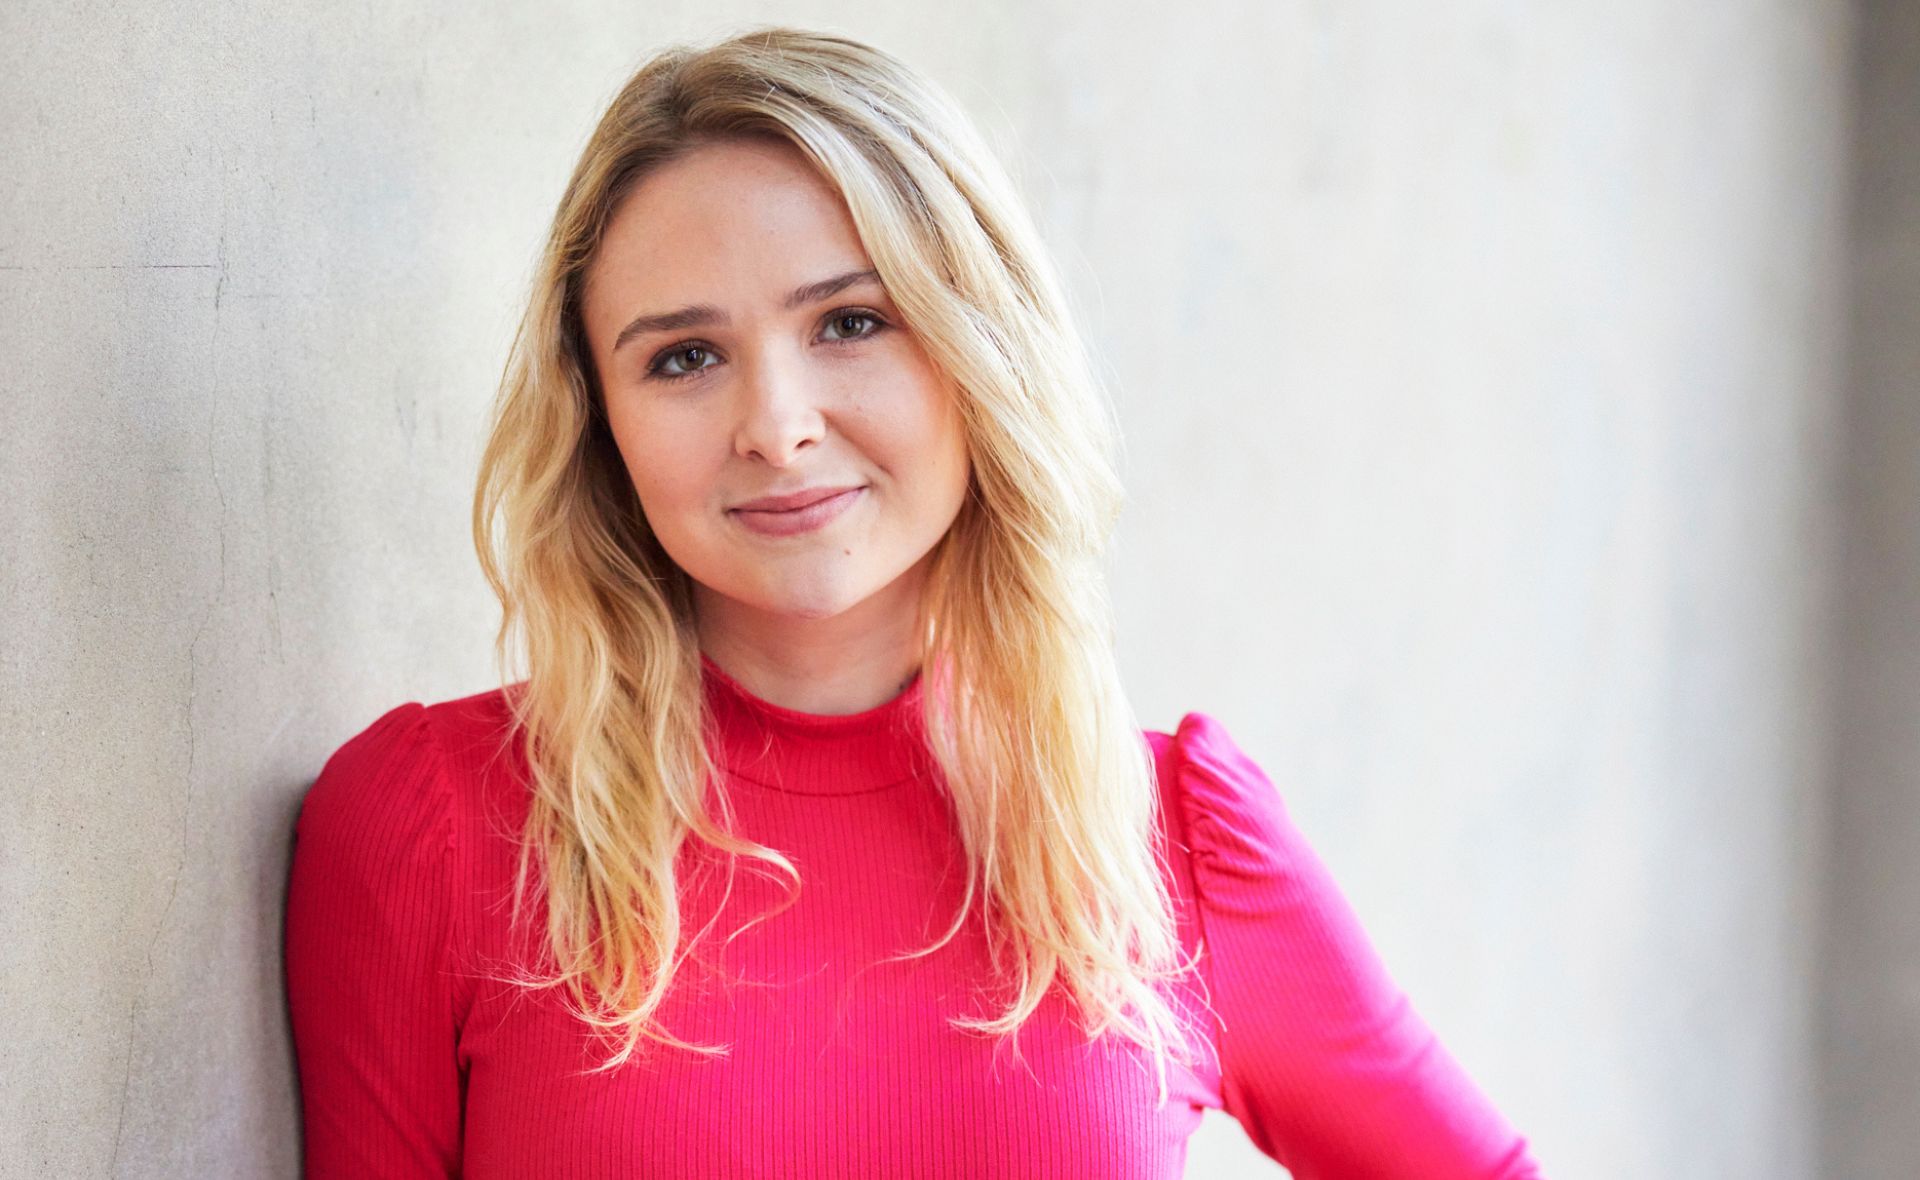 EXCLUSIVE: “Embarrassing, I know”: Home and Away newcomer Sofia Nolan dishes on her “un-Australian” start to the new gig